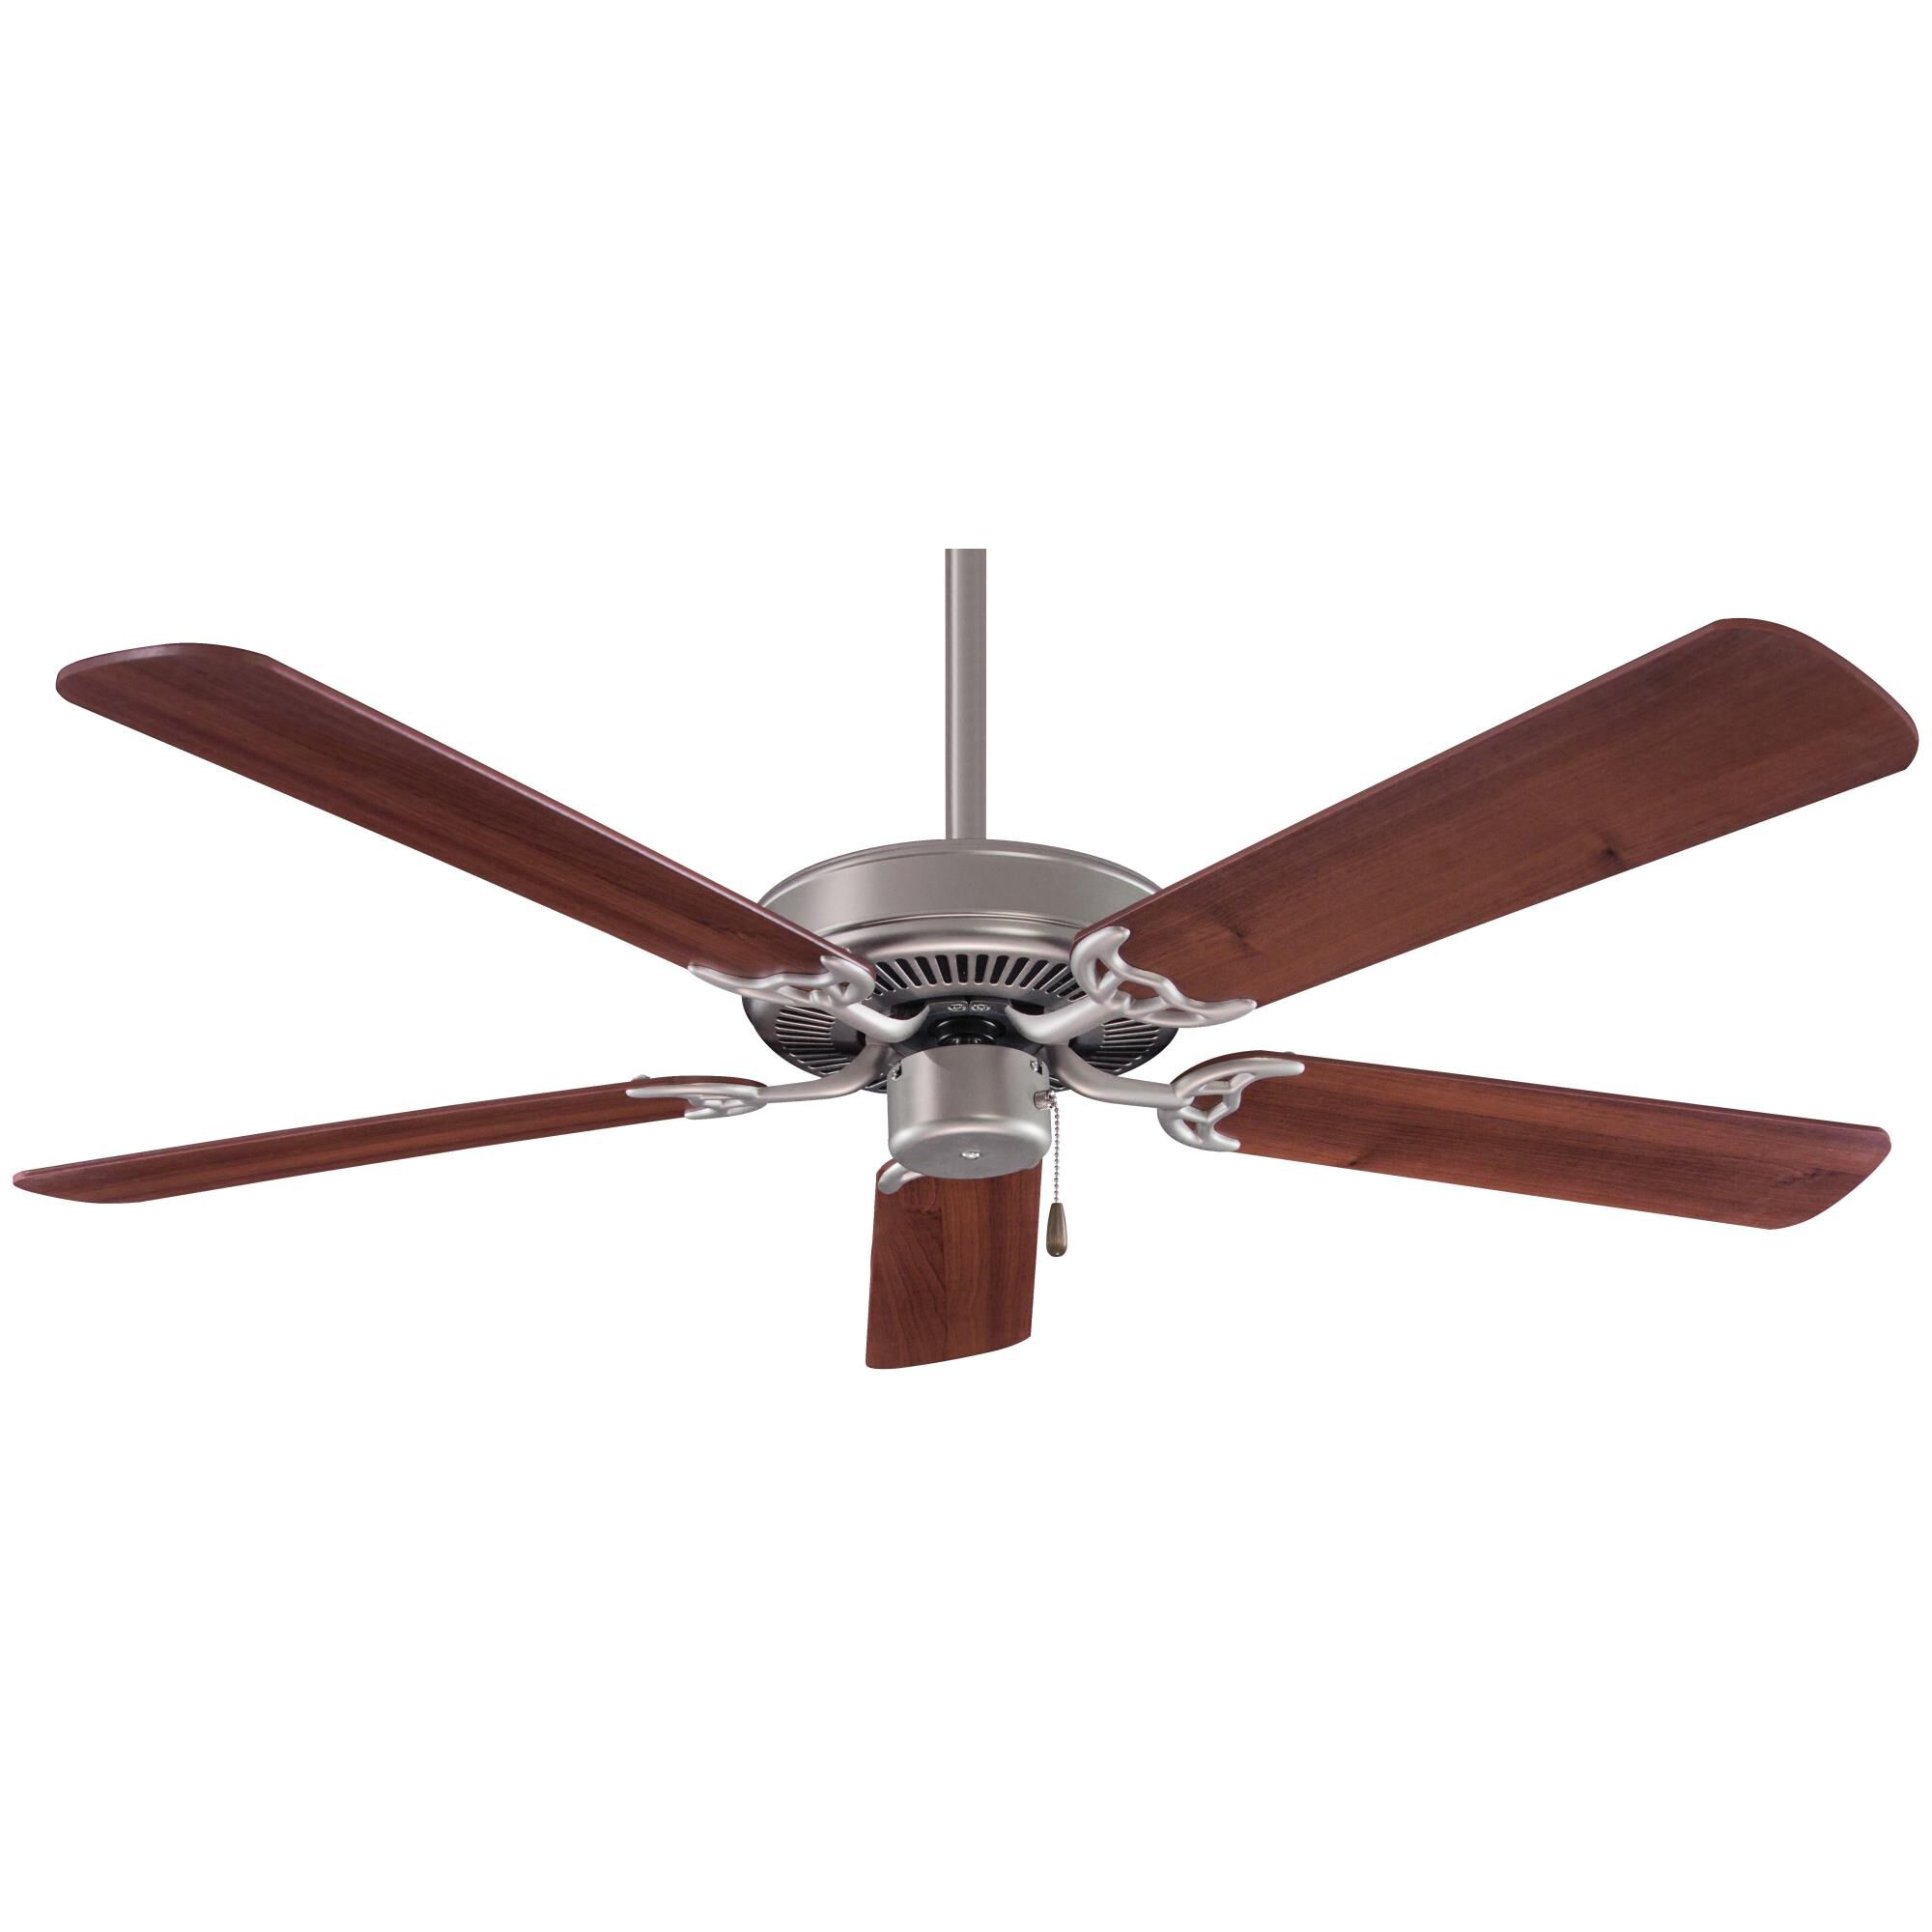 Photos - Fan Minka Aire Contractor 52 Inch Ceiling  Contractor - F547-BS/DW - Transi